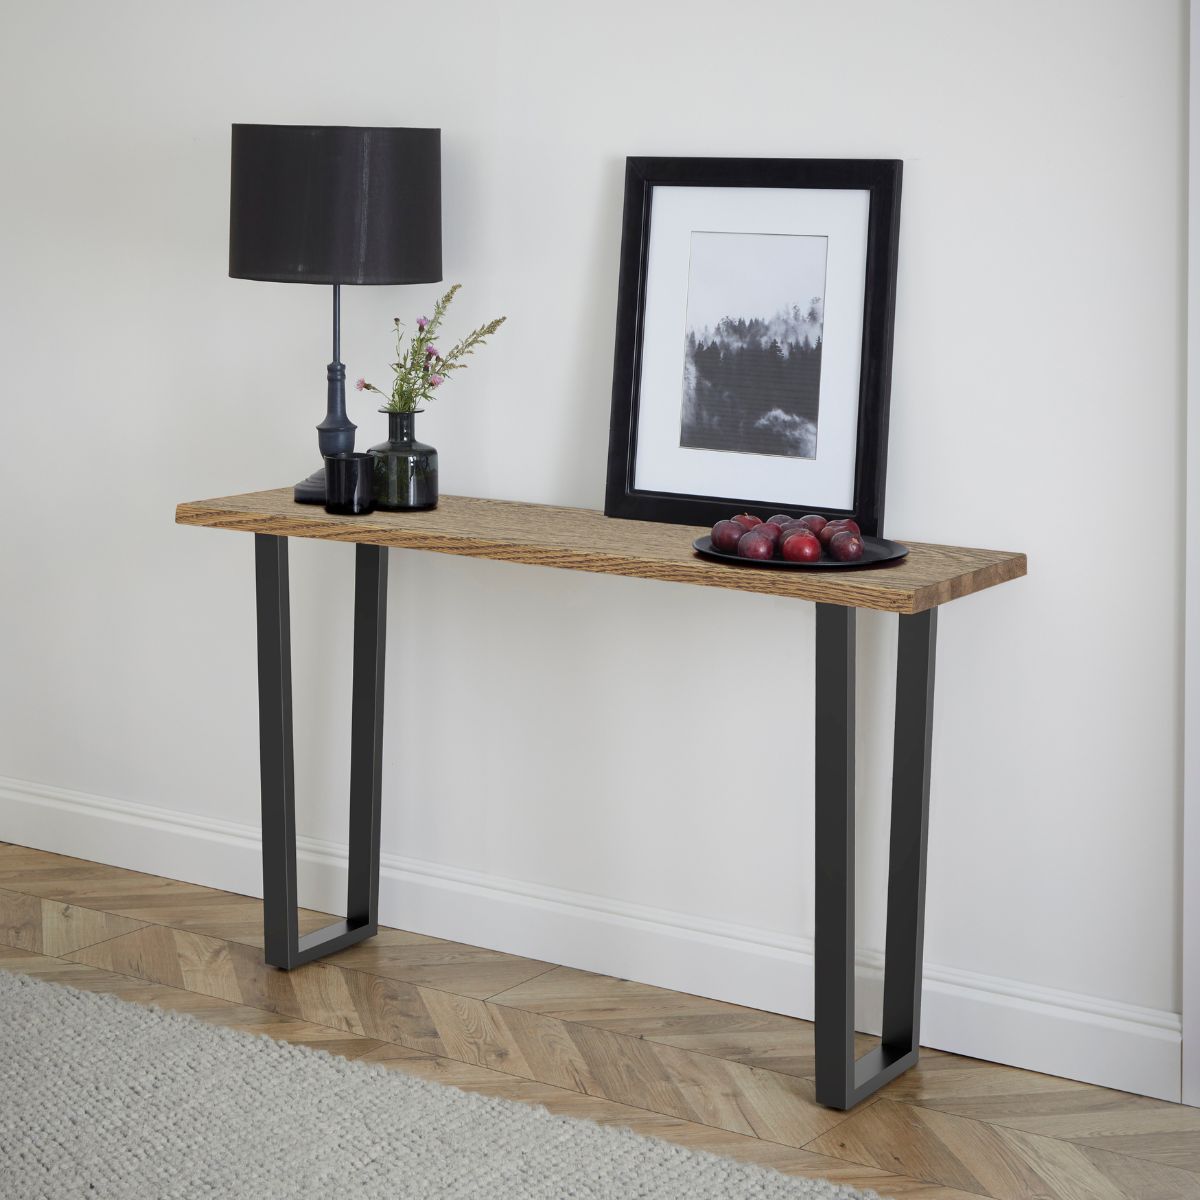 Jasmine Wooden Console Table - 2